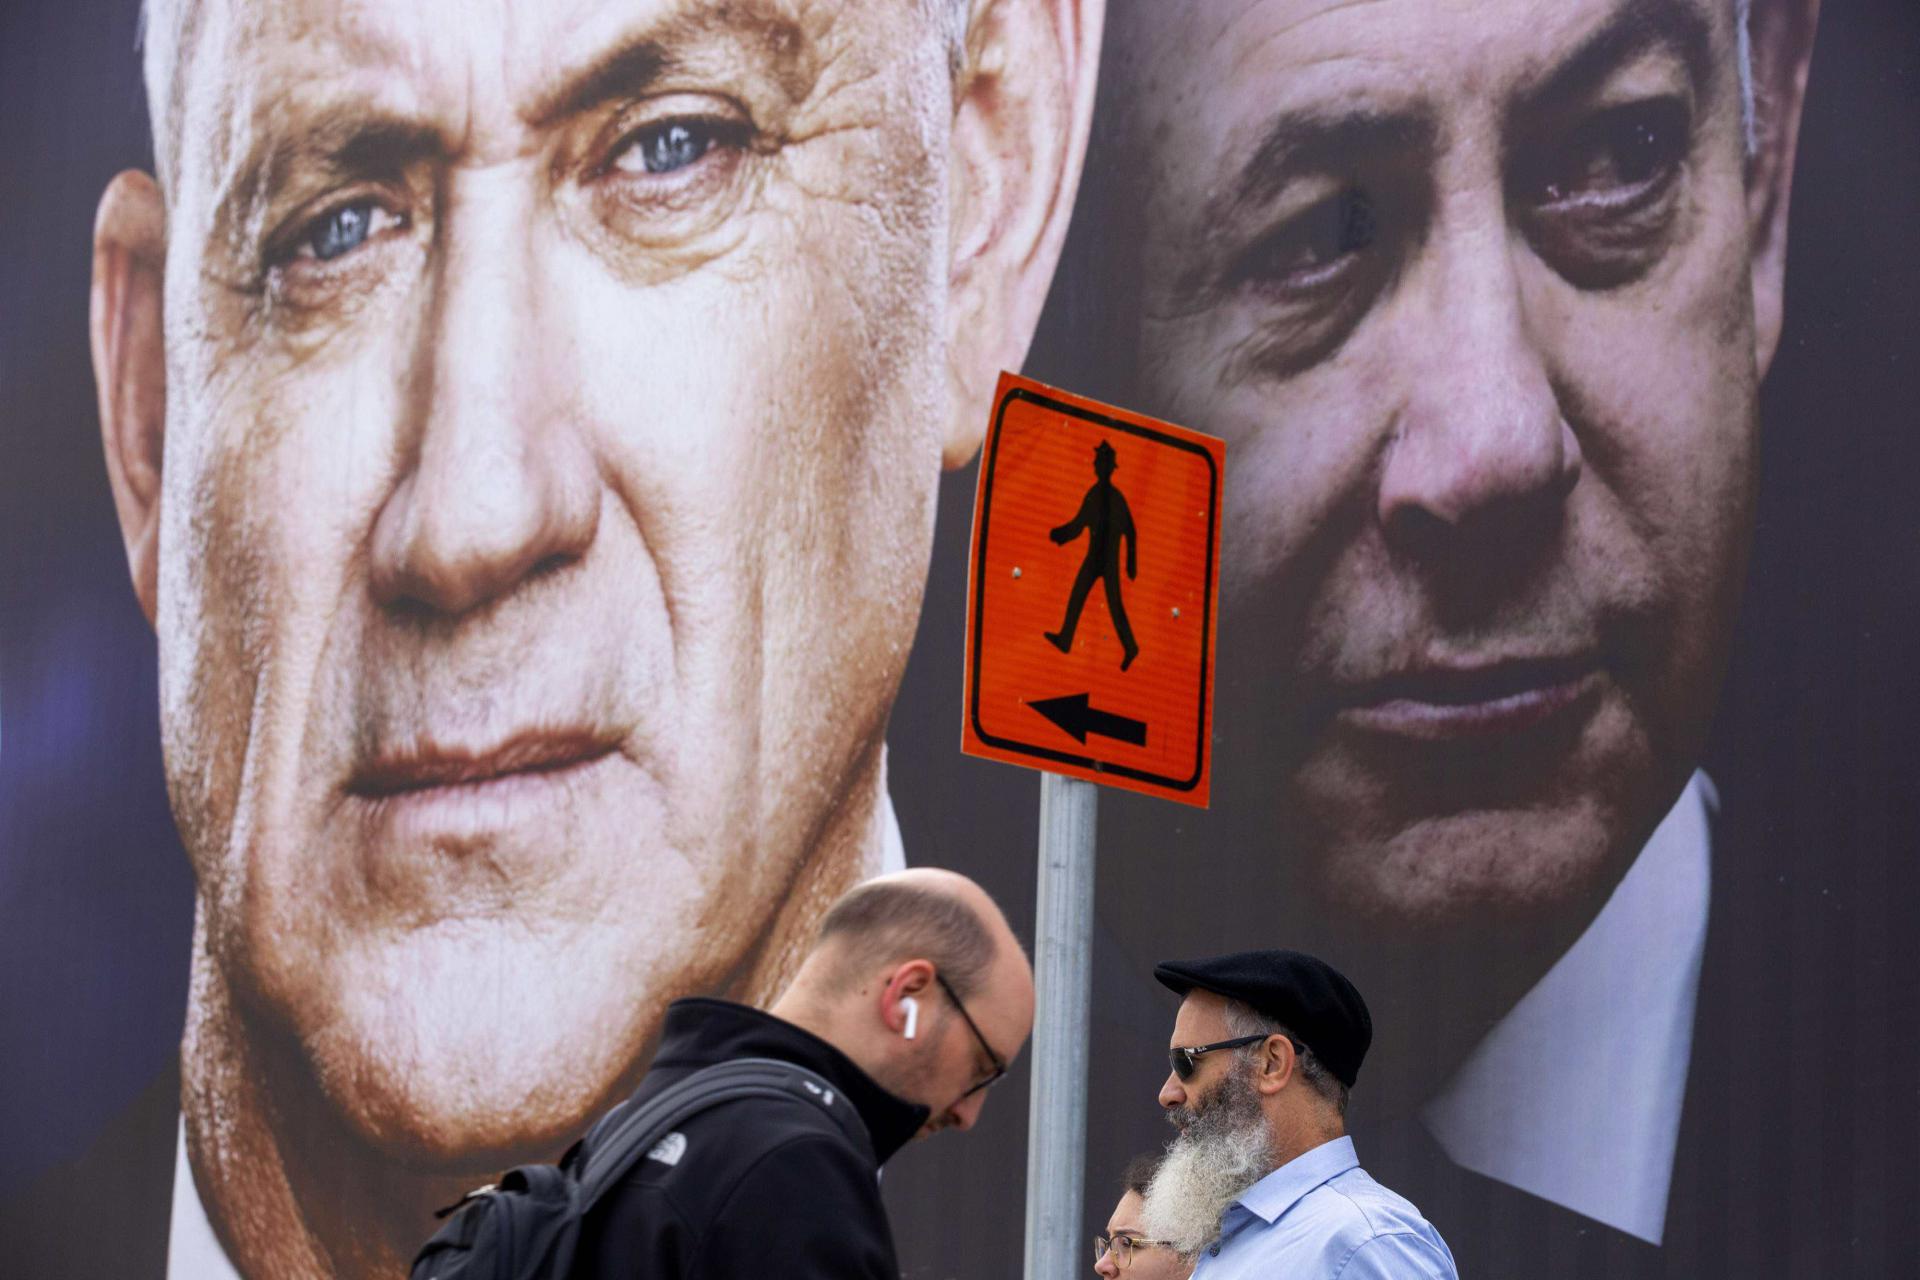 Netanyahu, head of the right-wing Likud party, had squared off against Gantz in three inconclusive elections over the past year